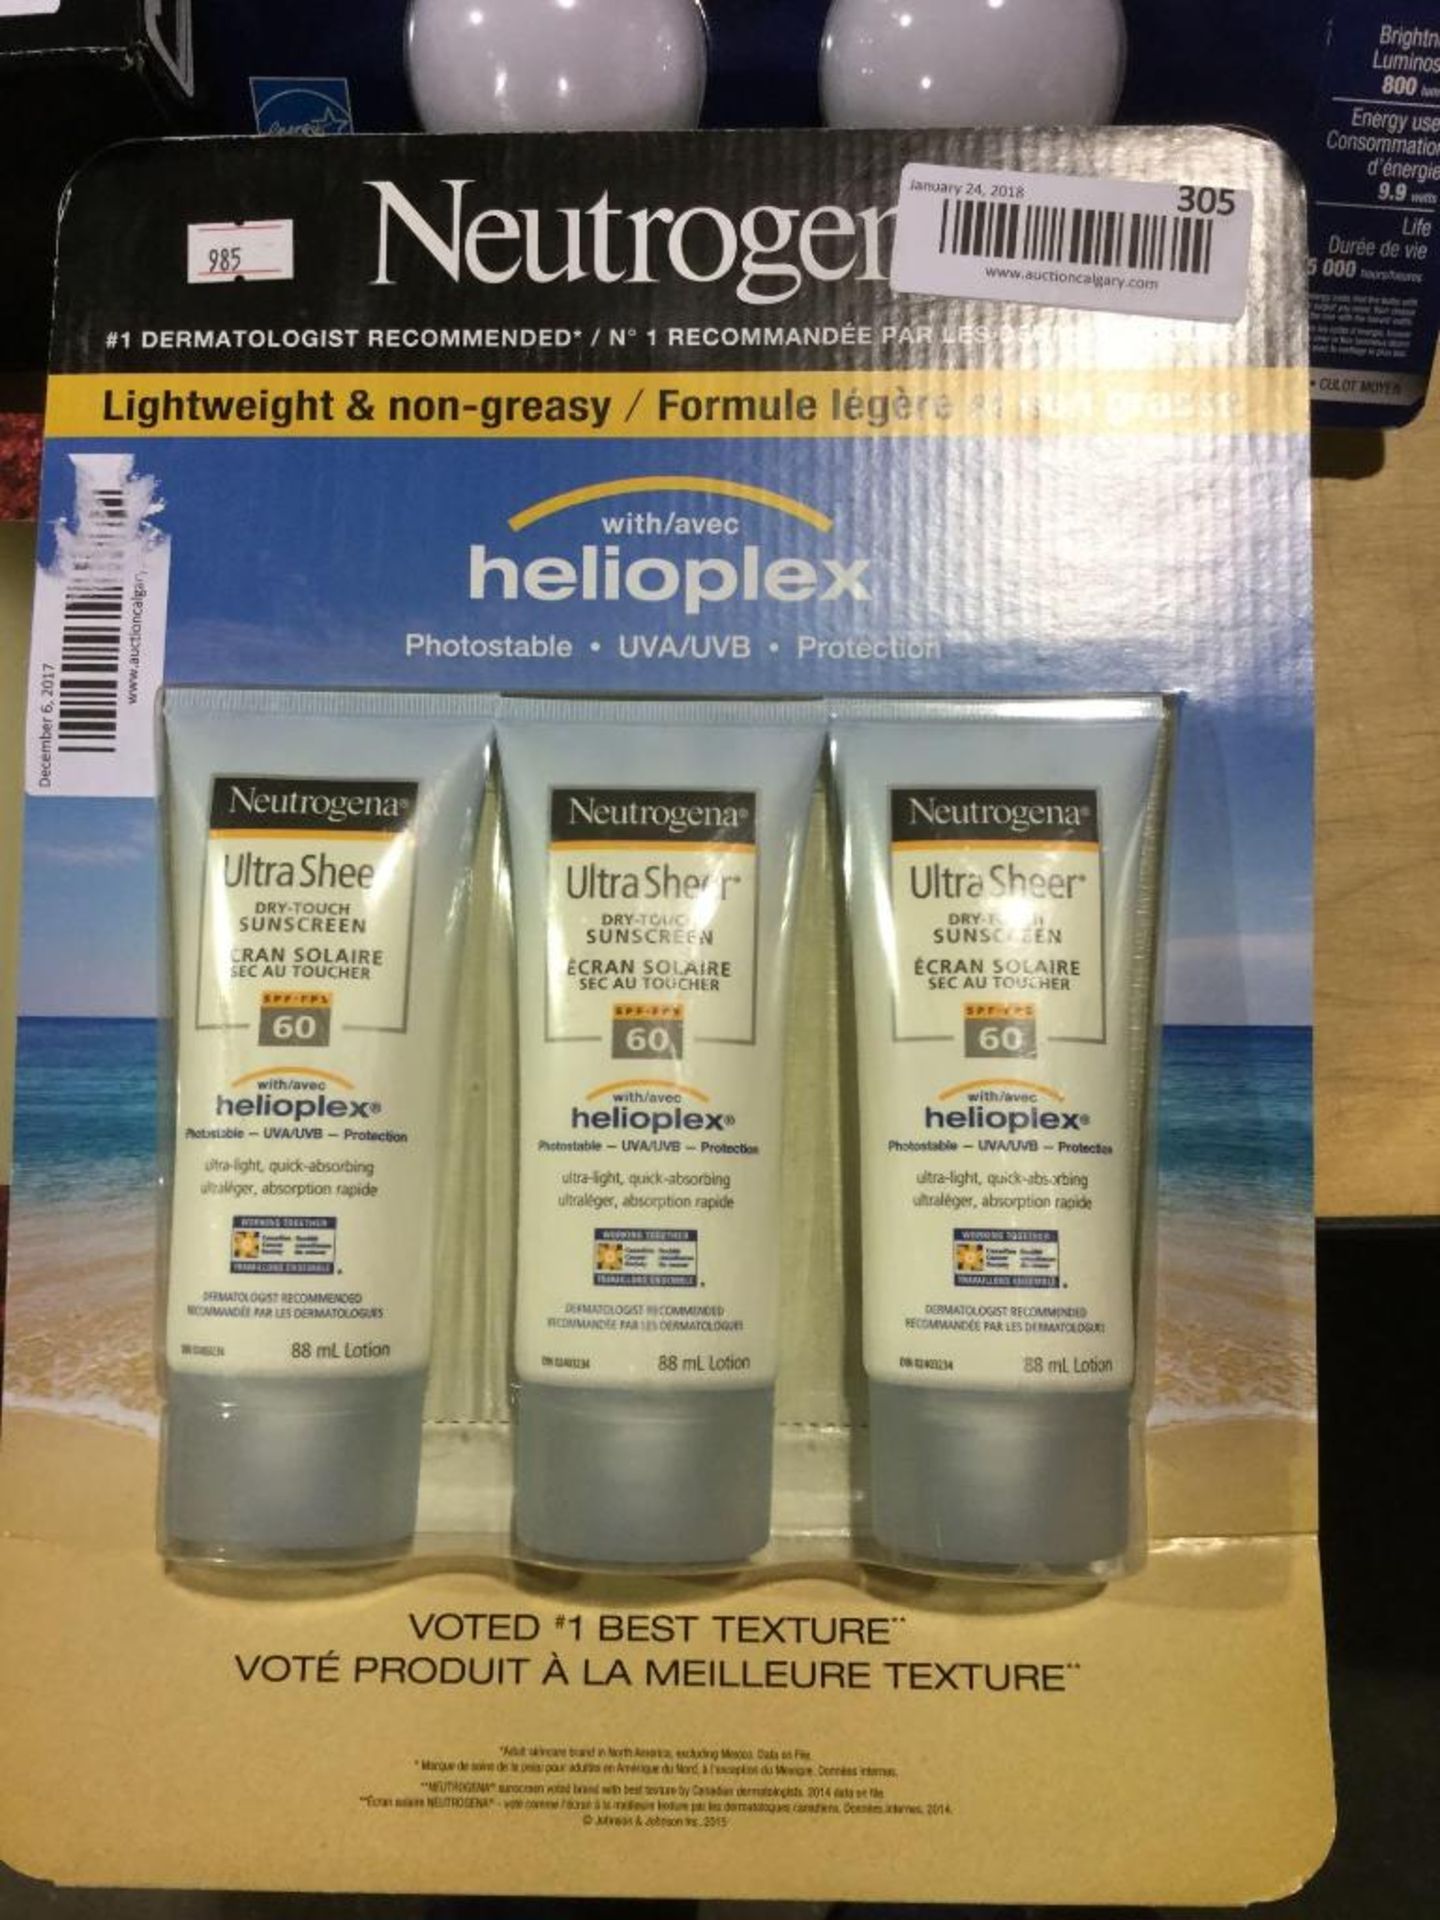 Neutrogena Sunscreen SPF 60 Dry- touch and light weight